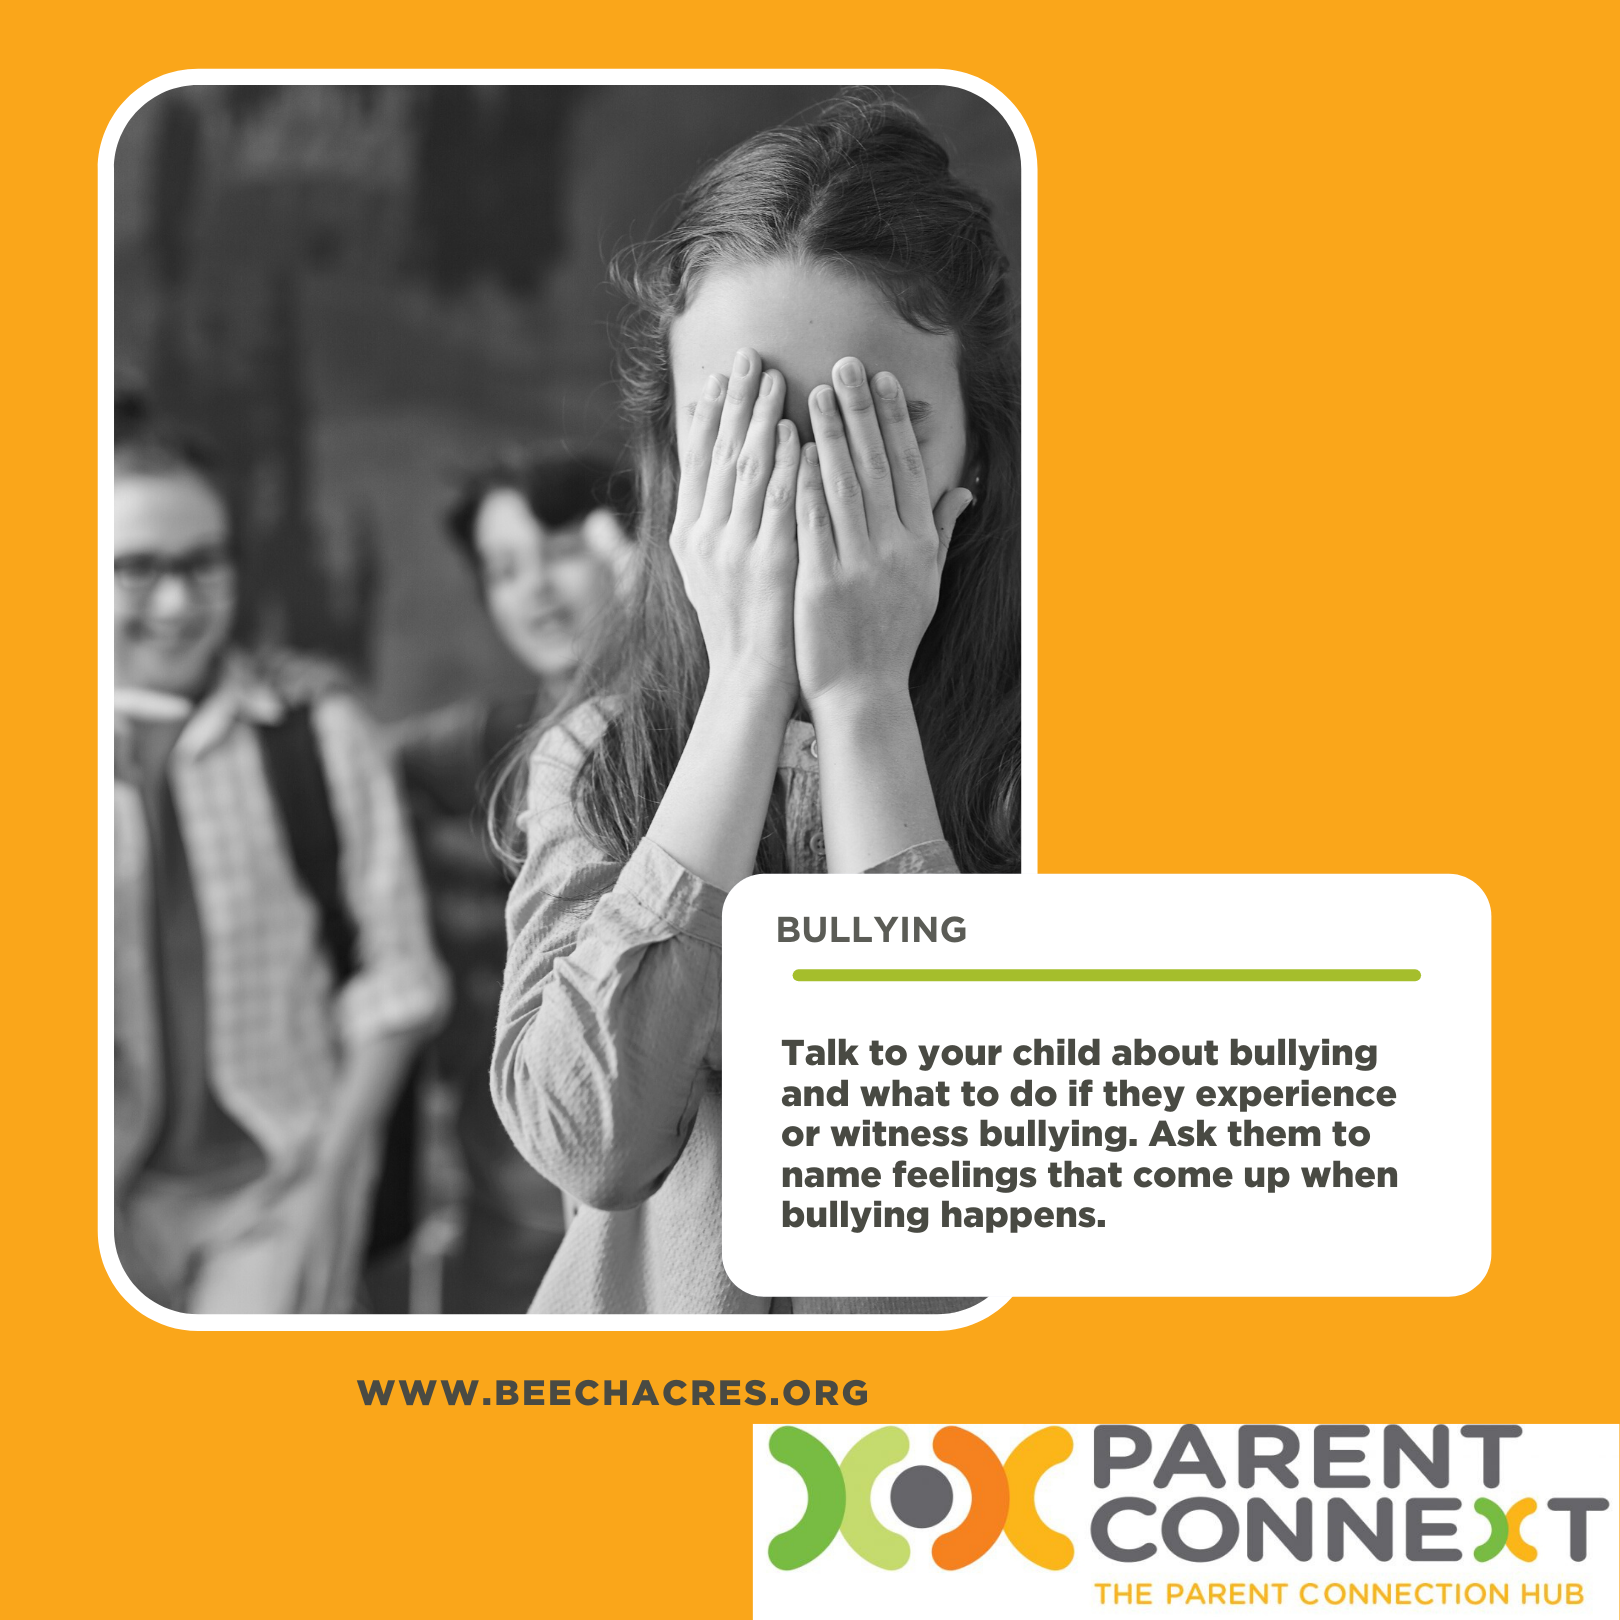 Parenting Information on Bullying From Parent Connext™